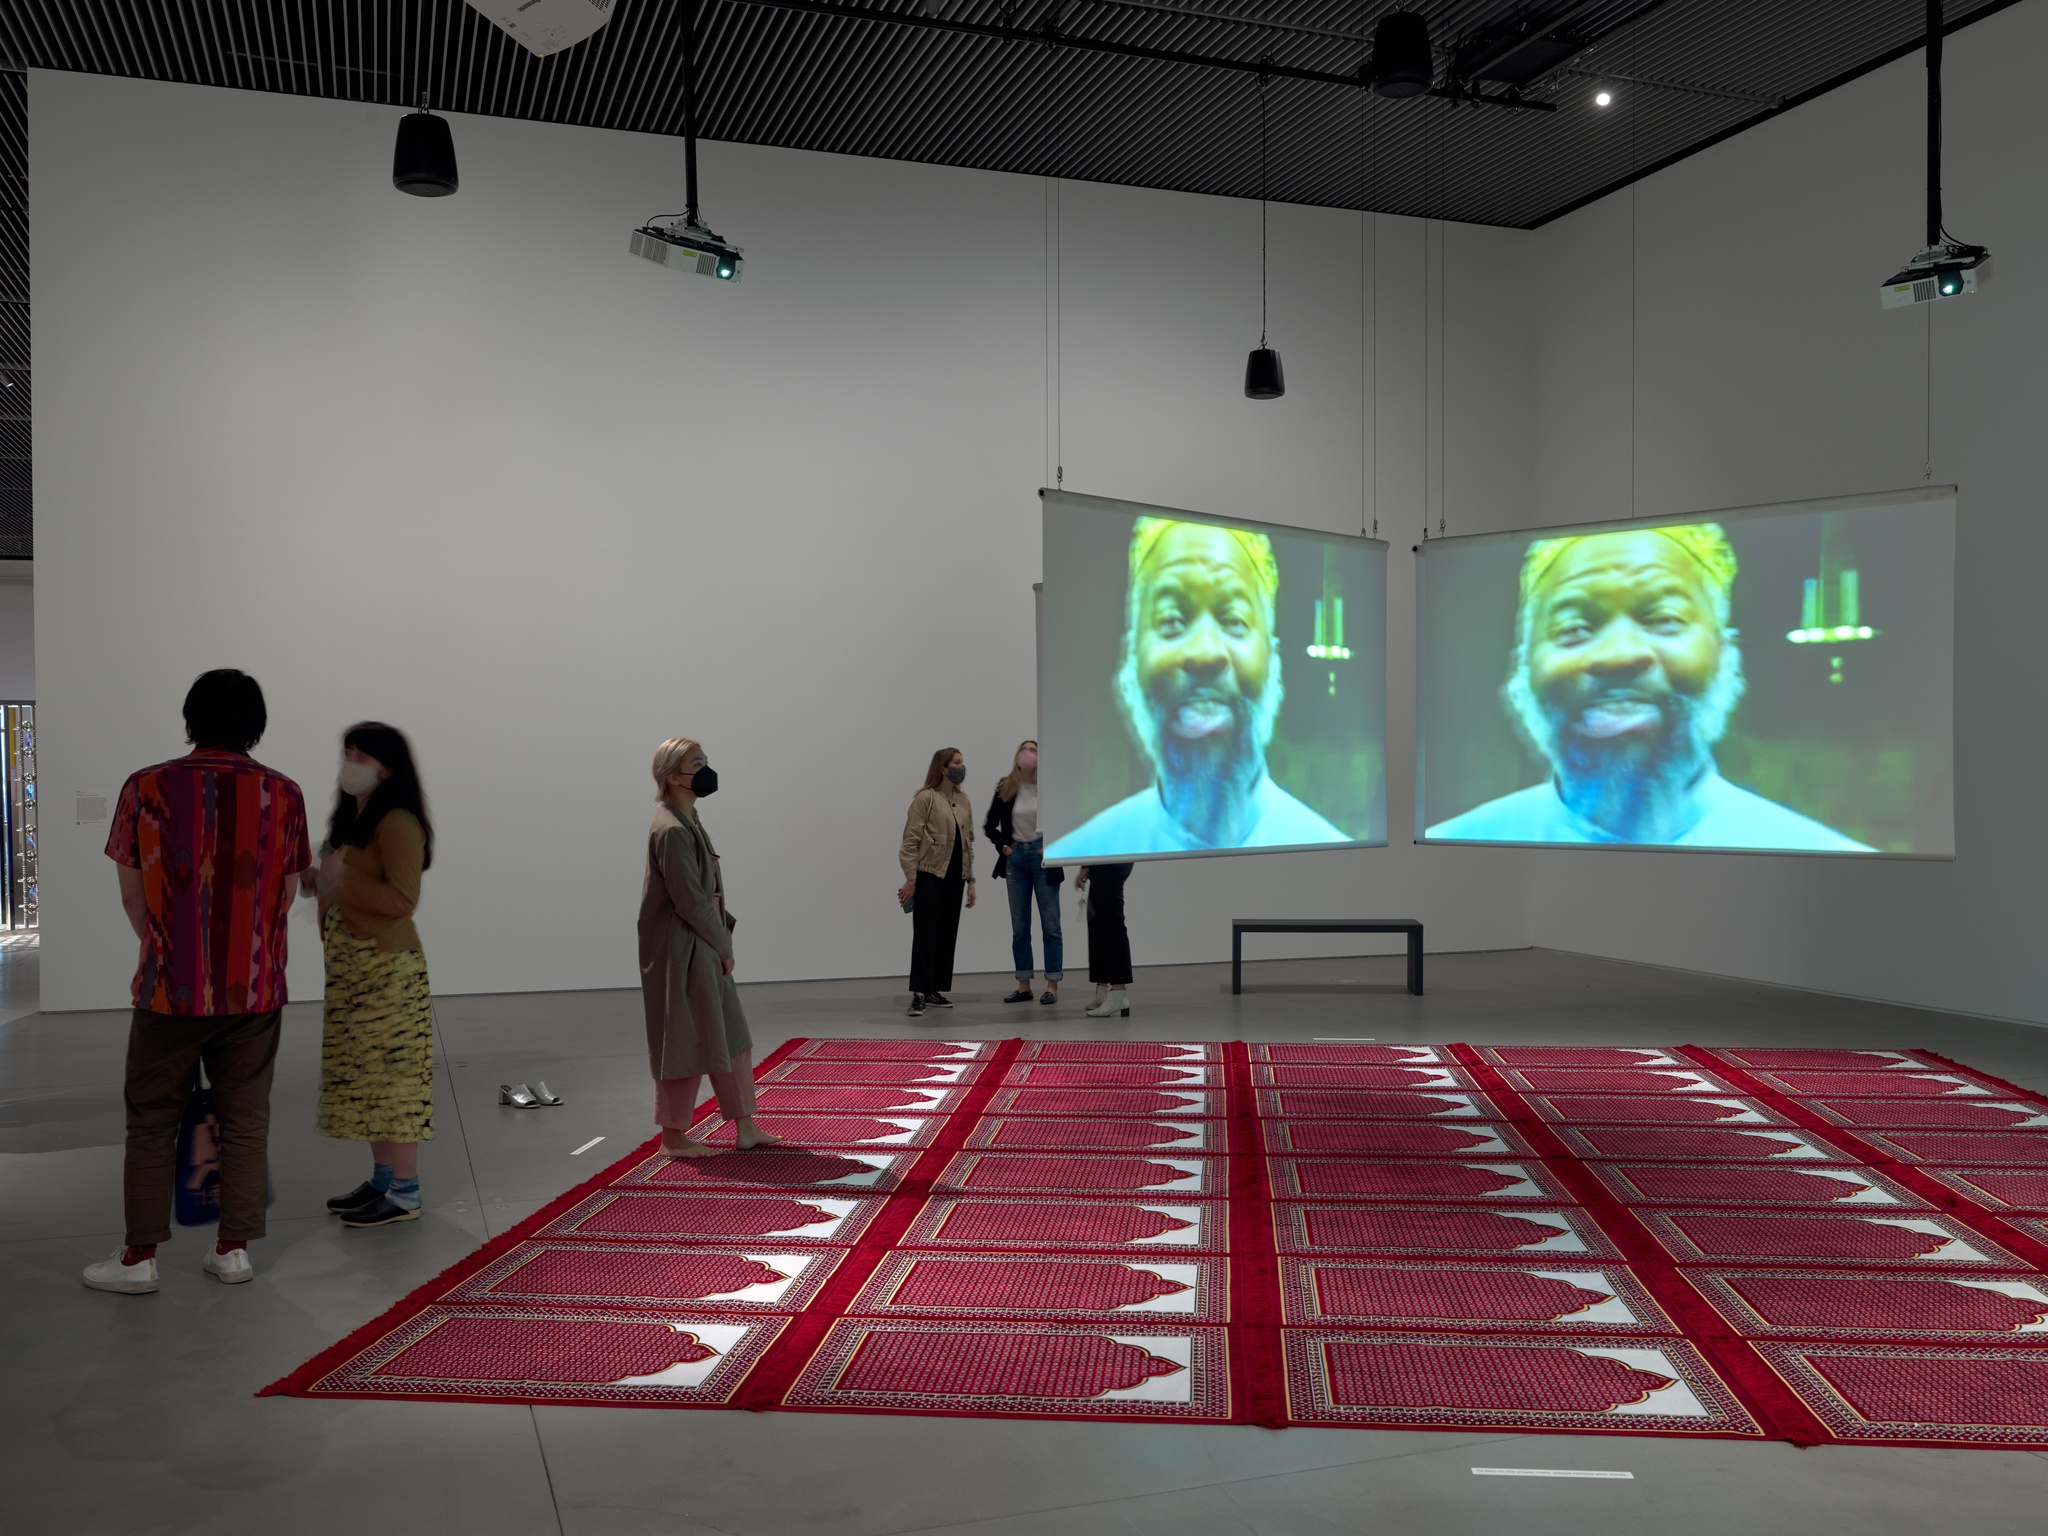 A scattering of people experiencing an artwork comprised of a square of red Islamic prayer mats on the ground and video screens in an X formation hanging above them projecting a film about a Brooklyn mosque.